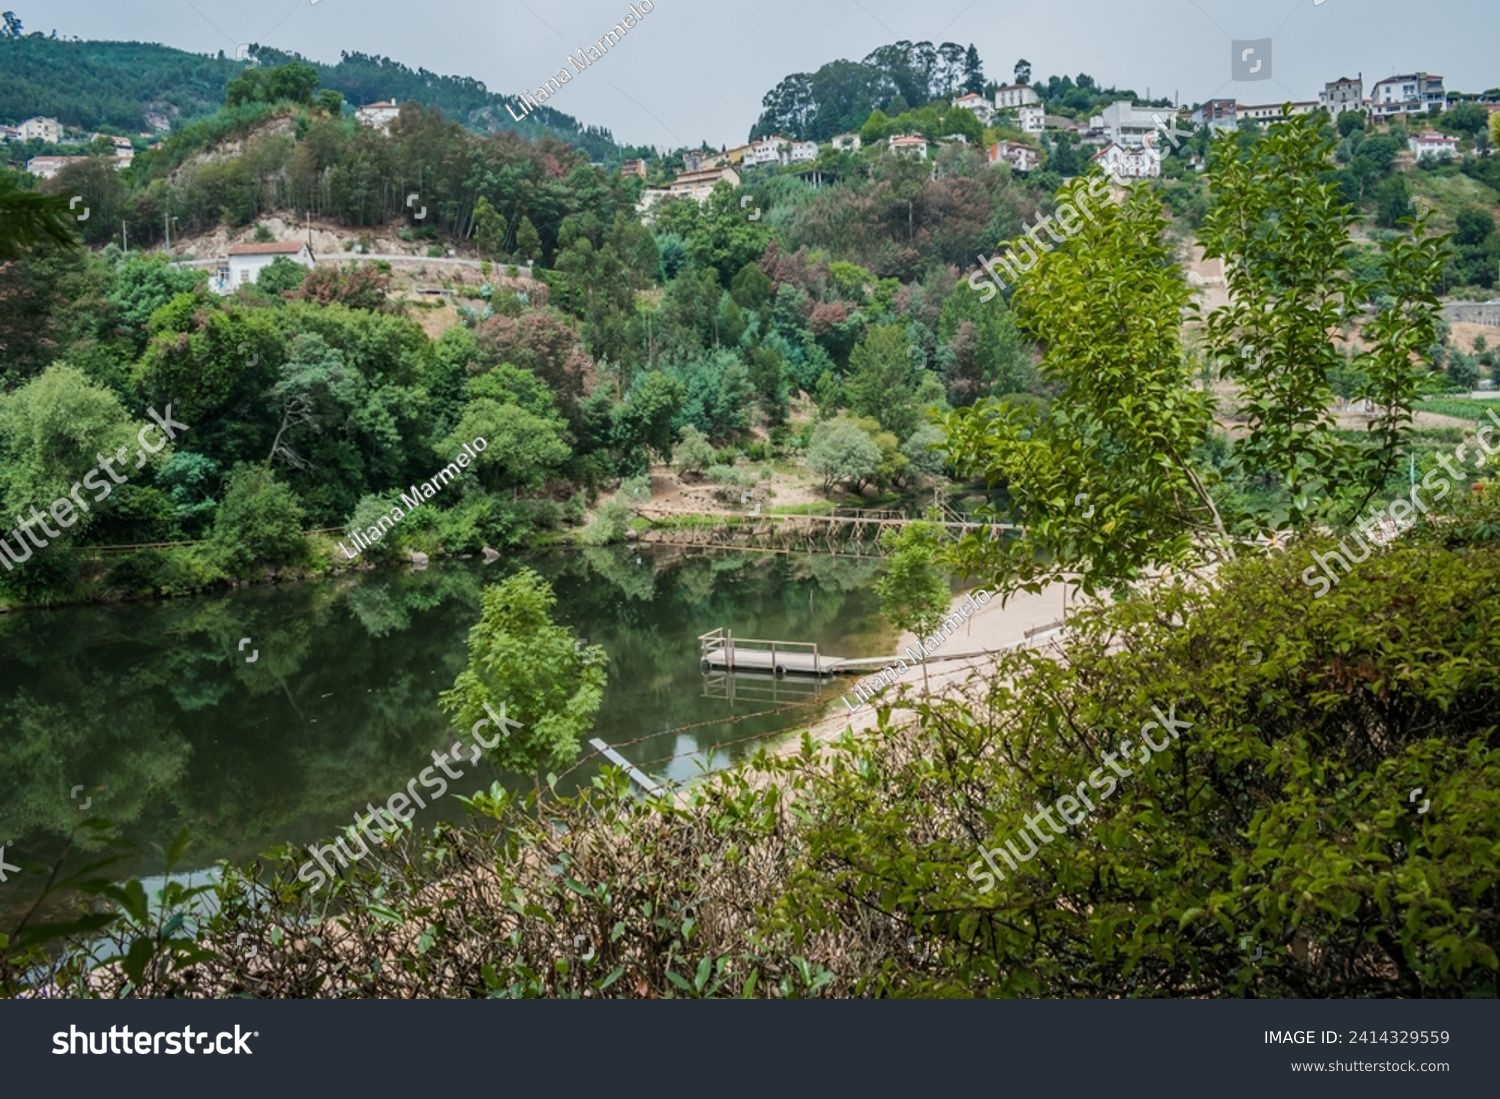 Green leafy bushes framing the Mondego river with wooden bridge in the valley with houses on the hill, Penacova PORTUGAL #2414329559